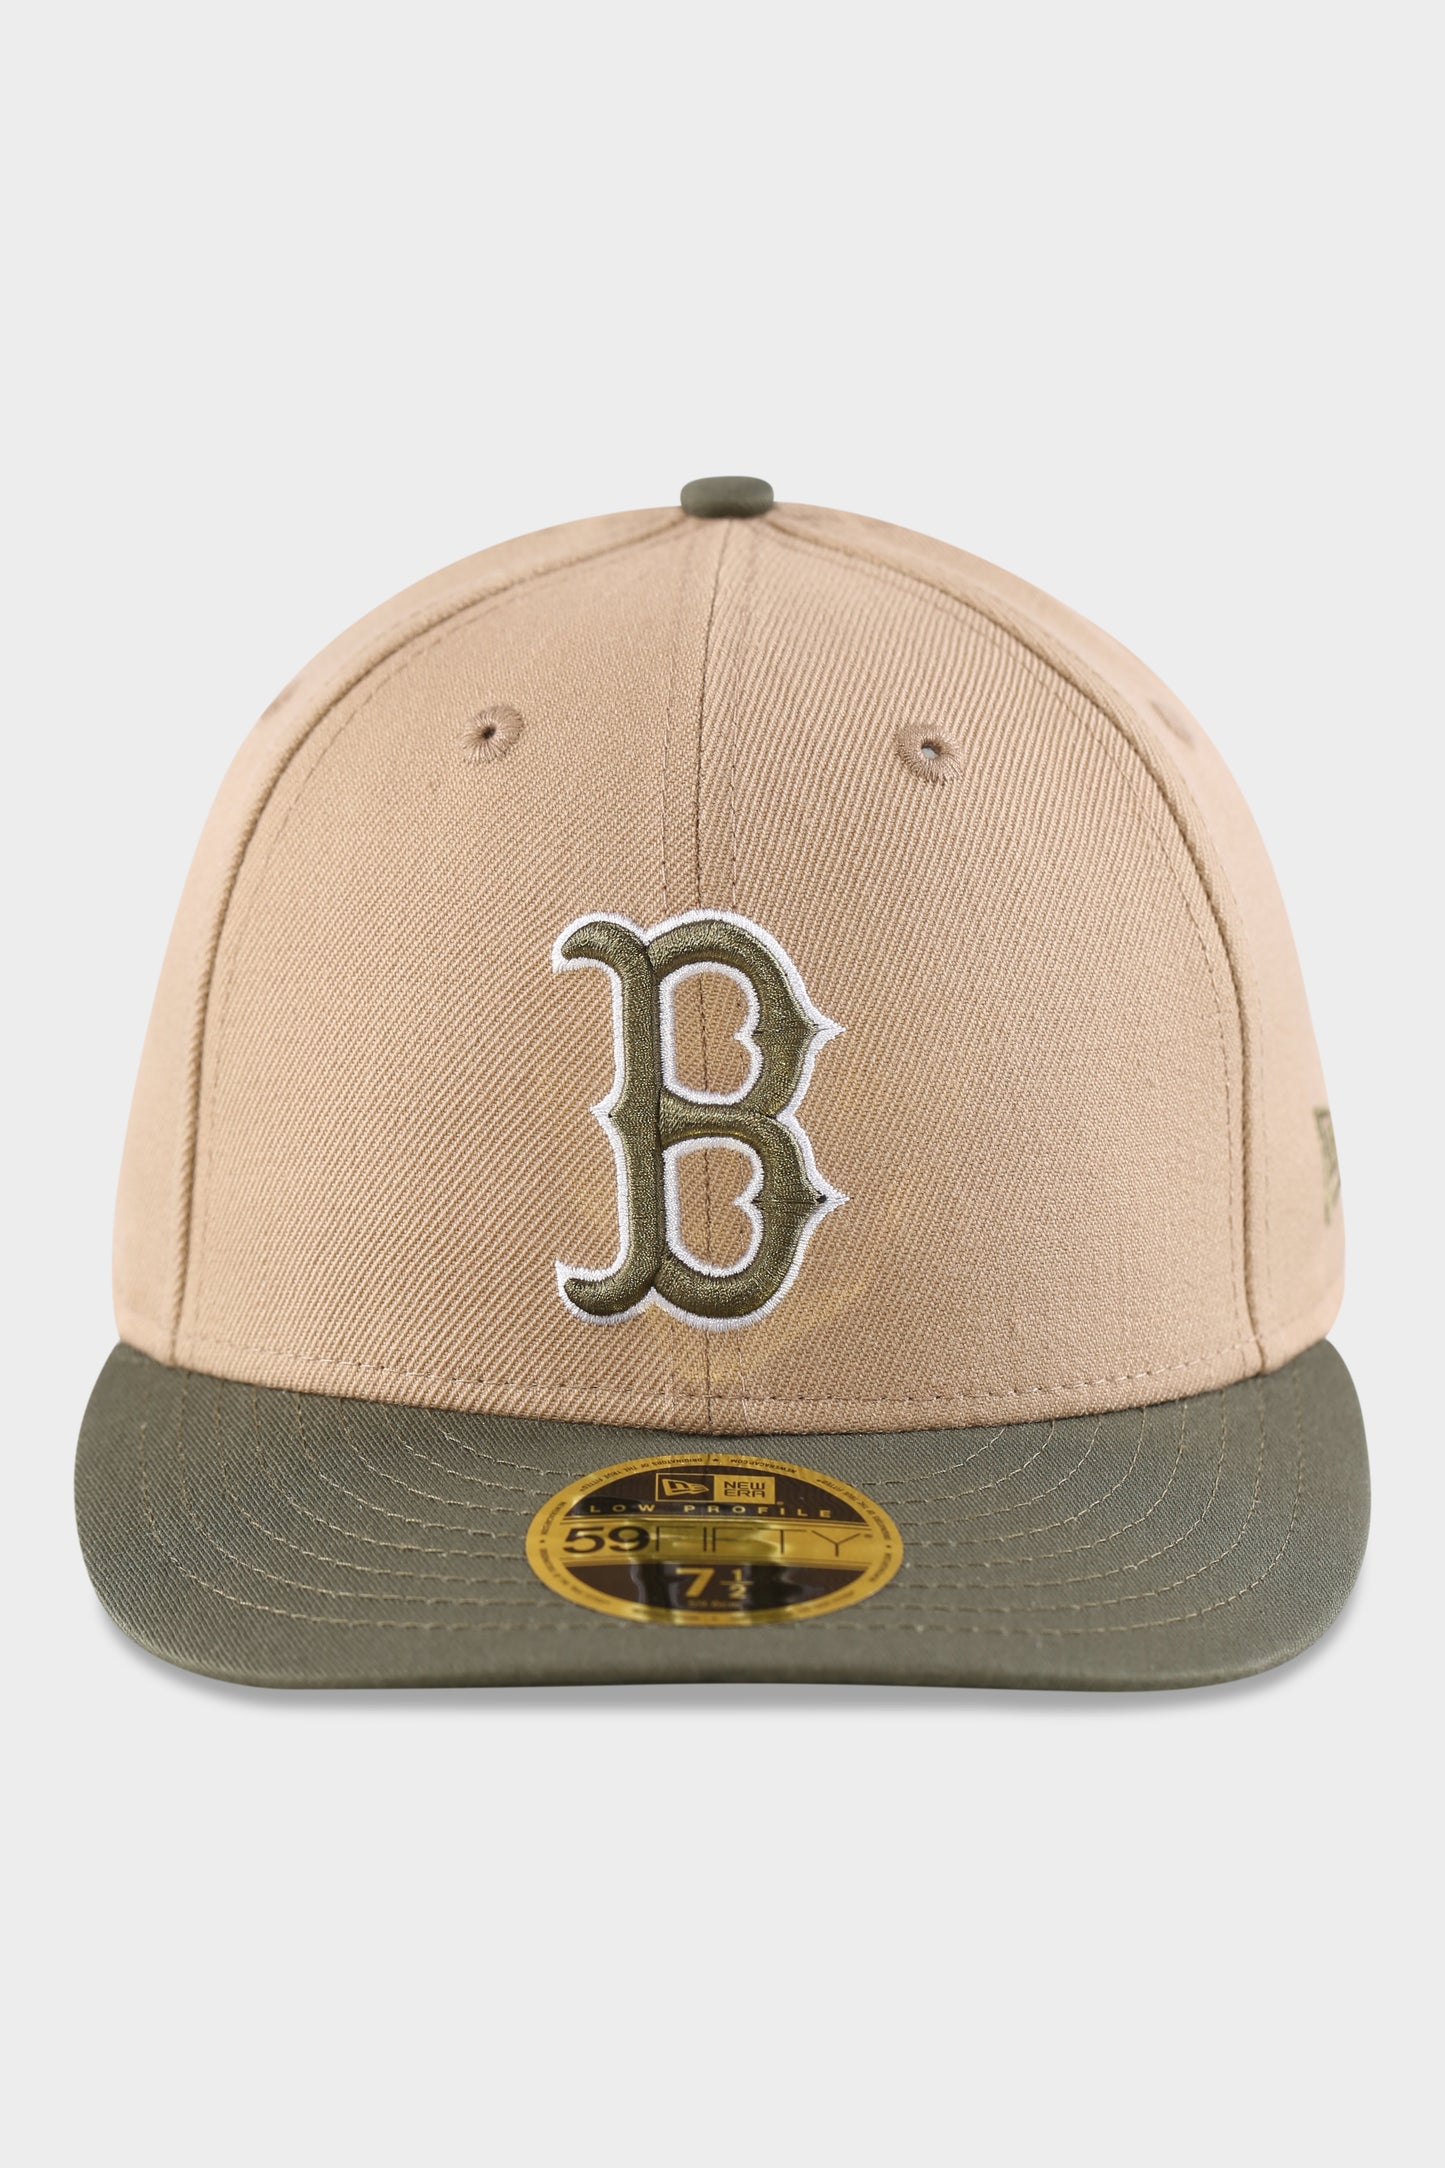 New Era 5950 Red Sox Camel/New Olive Front